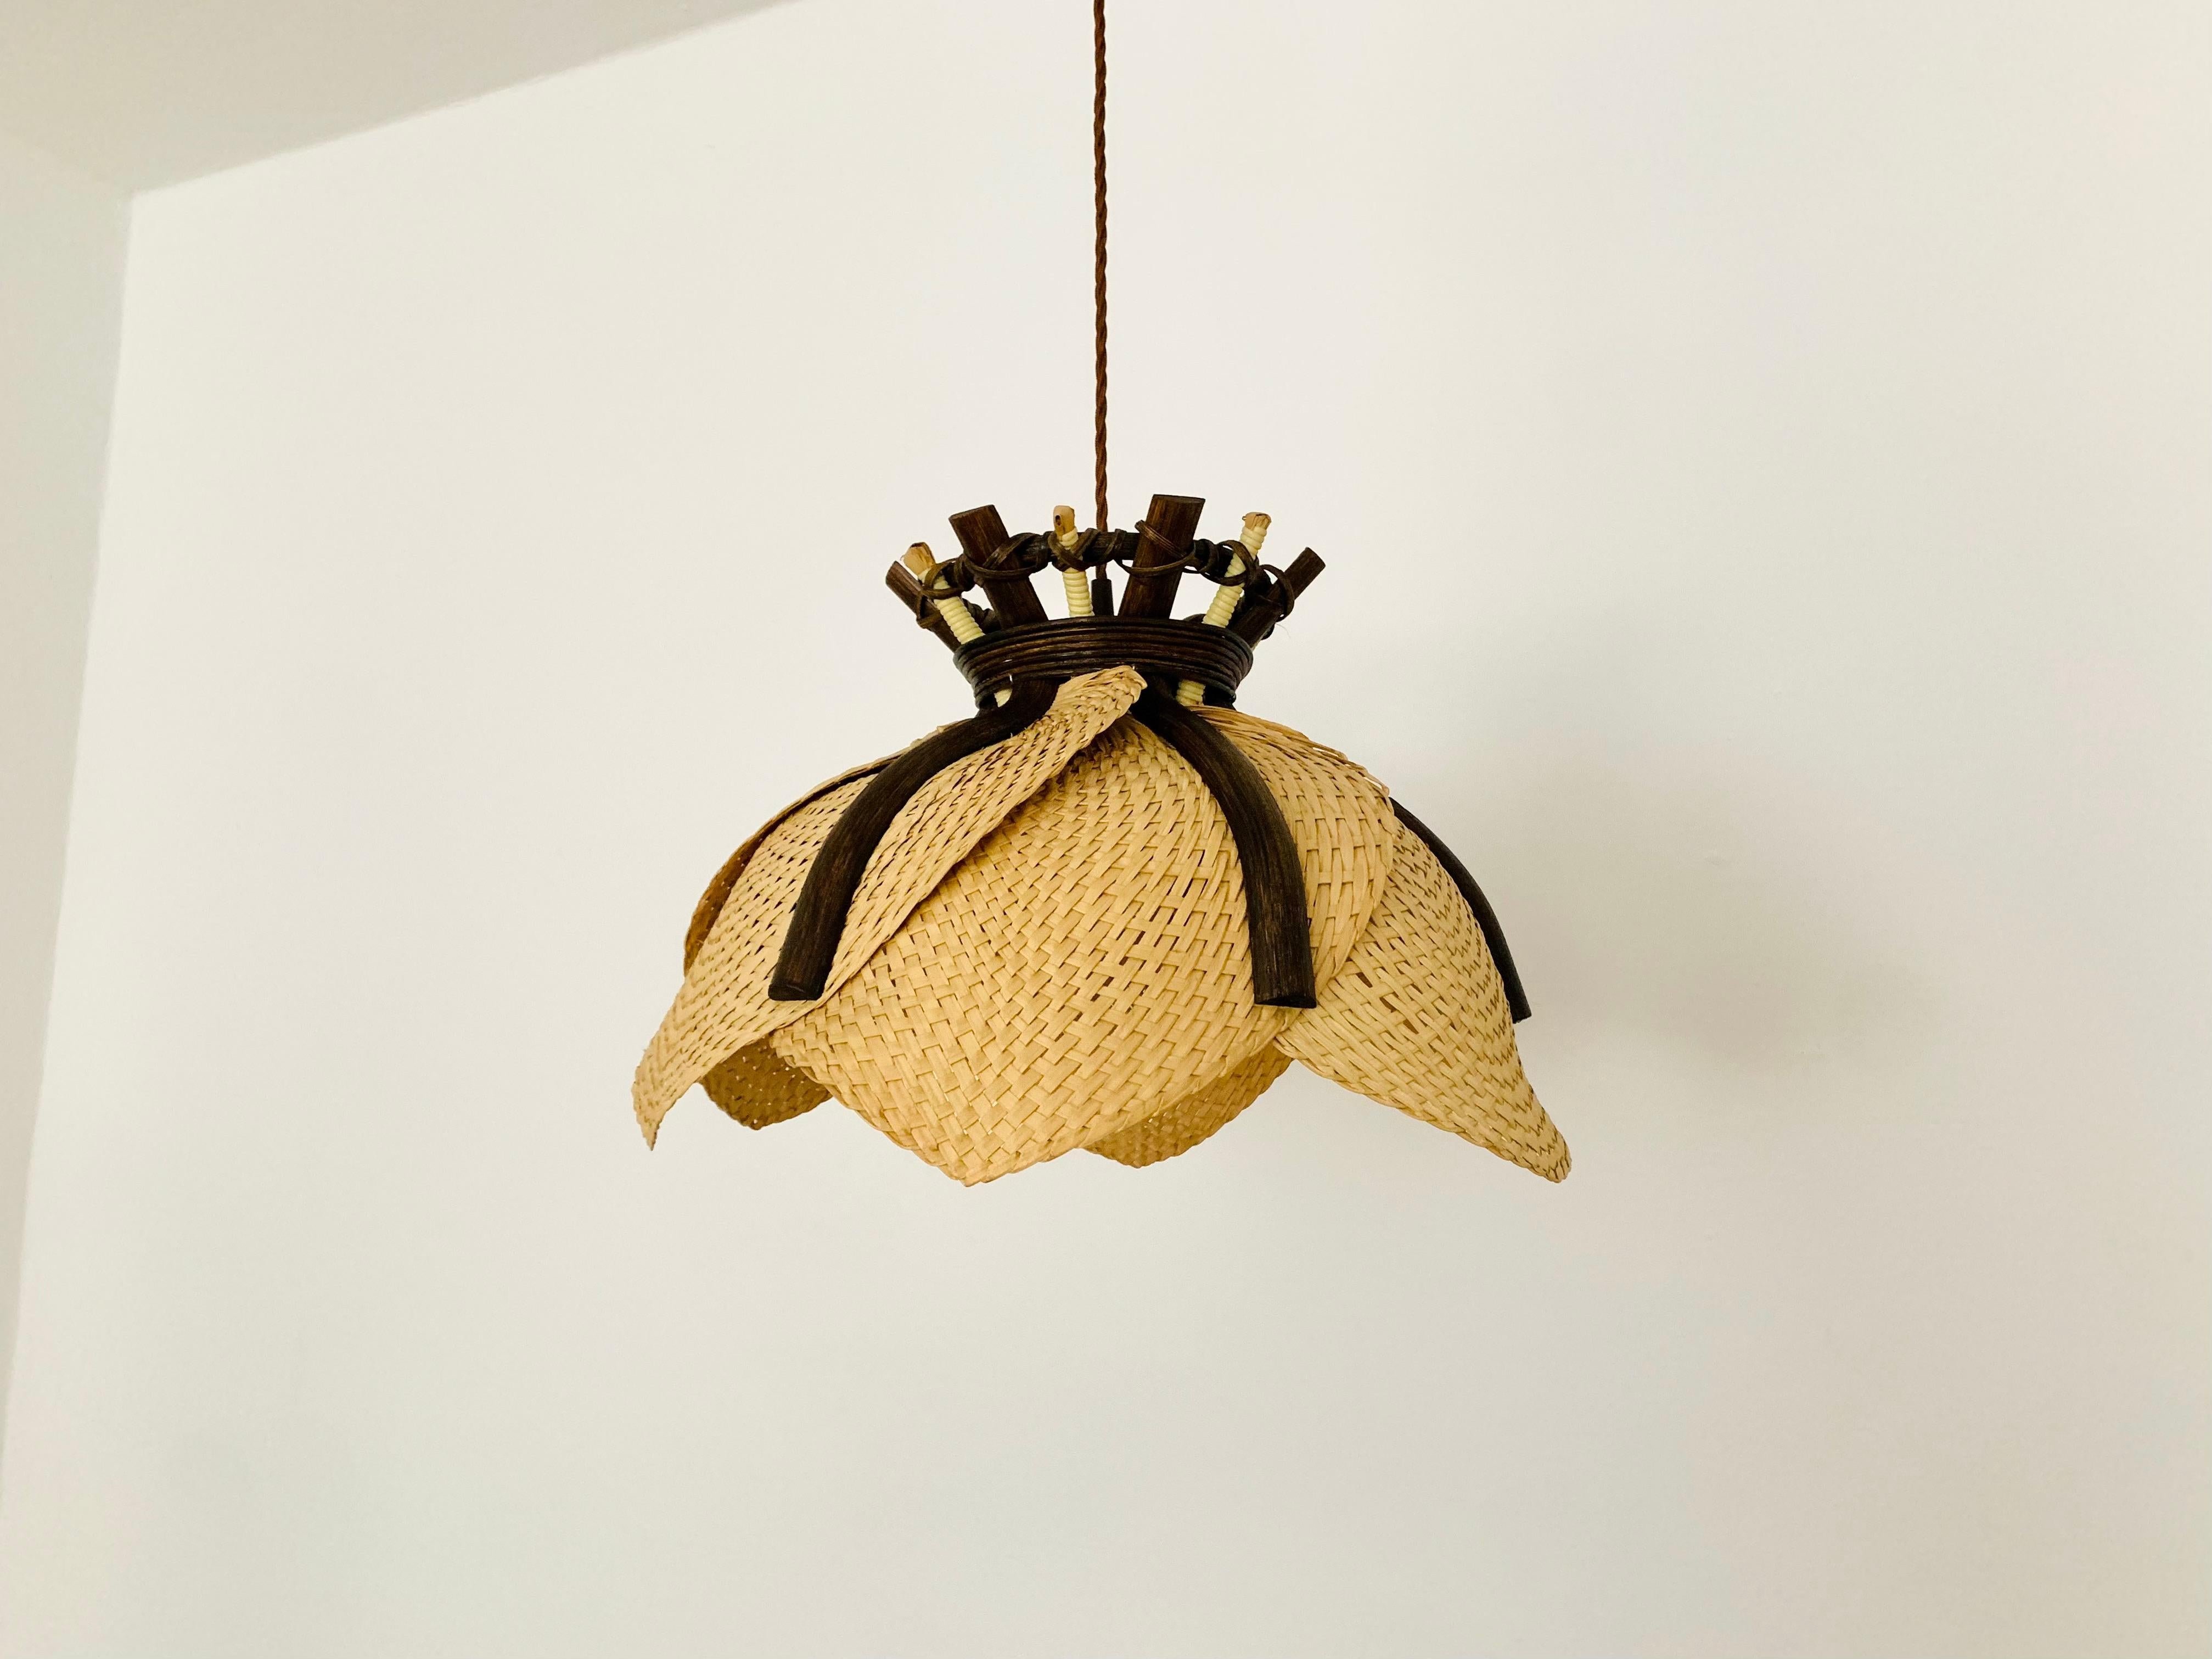 Beautiful pendant lamp from the 1960s.
The shape and materials create a warm and very pleasant light.
Wonderful contemporary design and an asset for fans of natural materials.

Condition:

Very good vintage condition with slight signs of age-related